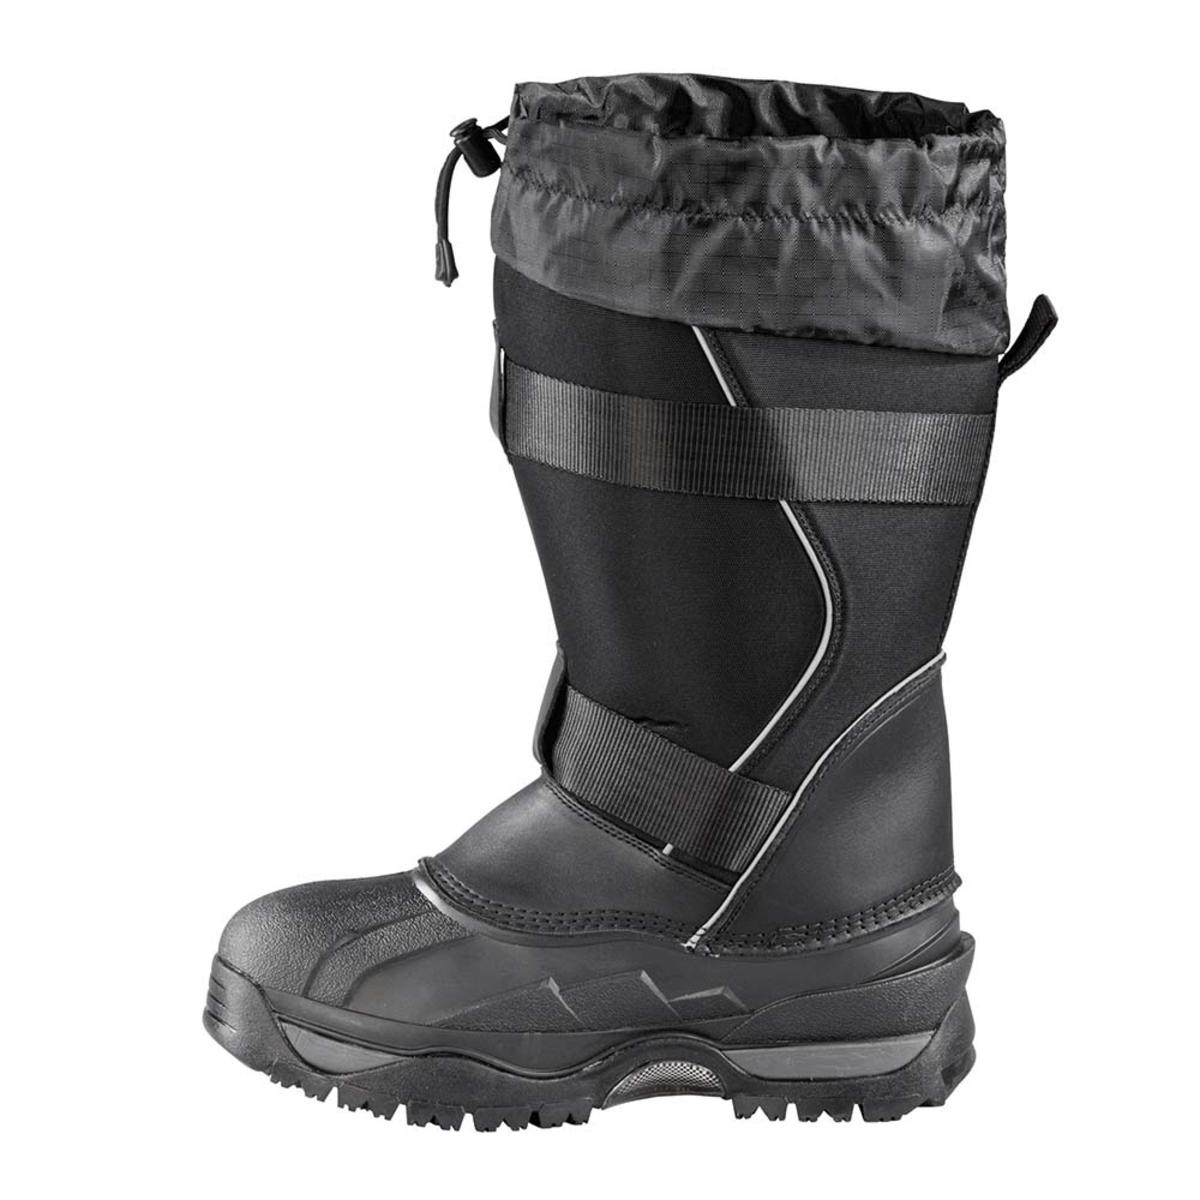 Baffin  4000-0048-001-14; Impact Boots Black Size 14 - image 4 of 6